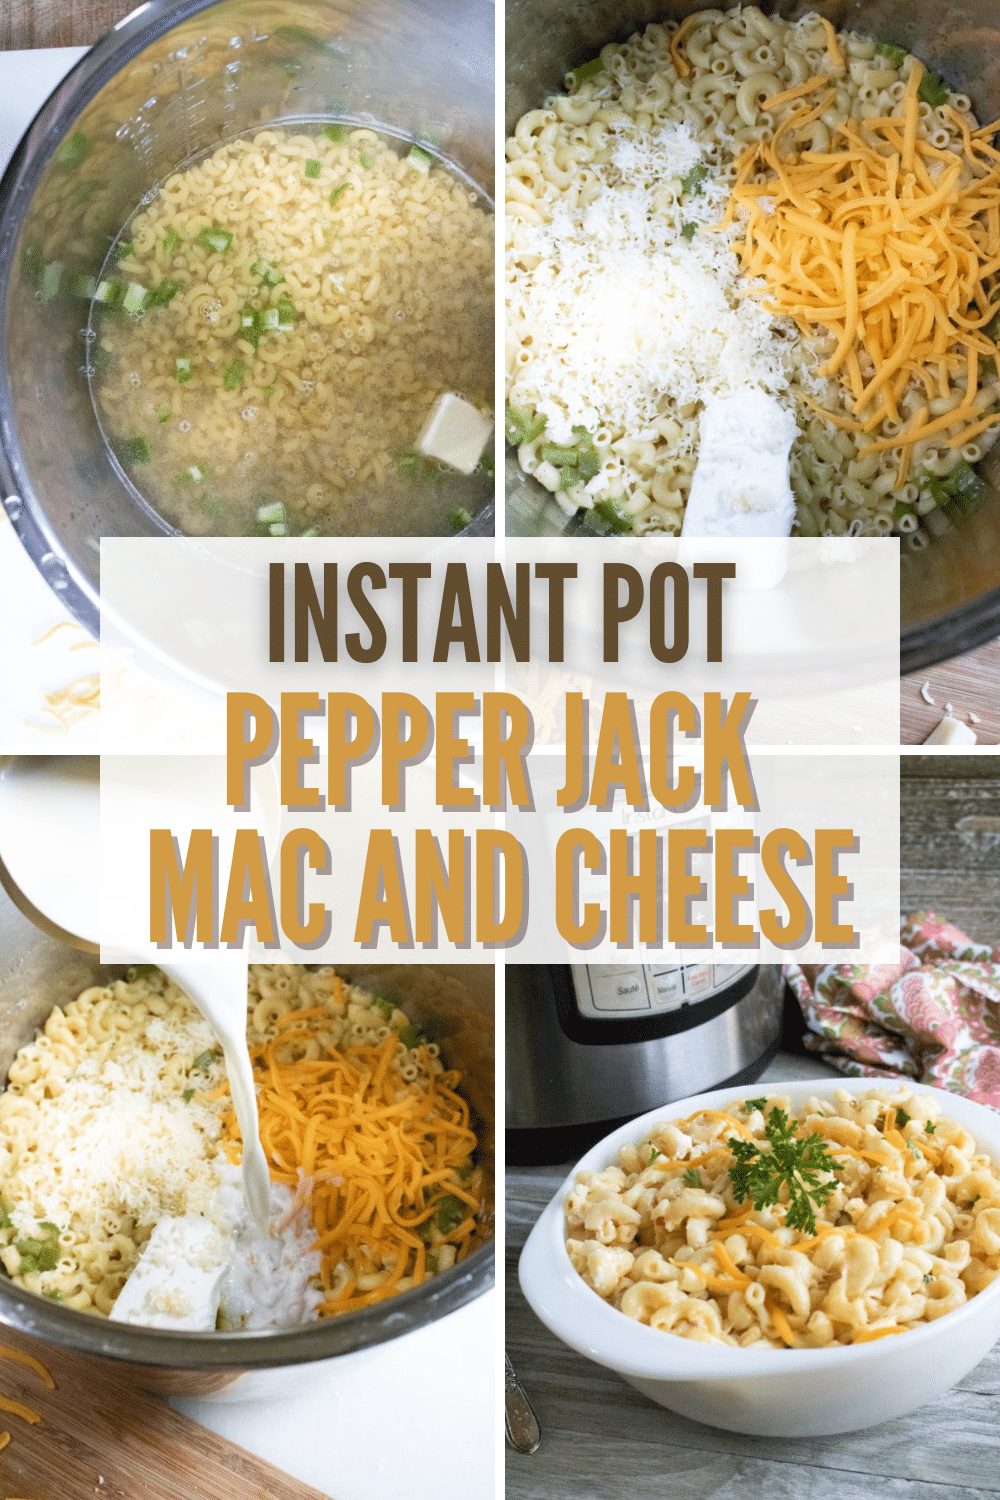 Family mealtimes are so incredibly important This Instant Pot Pepper Jack Mac and Cheese is the perfect meal to serve at the end of a busy day. #instantpot #pressurecooker #macandcheese #dinnerrecipe via @wondermomwannab